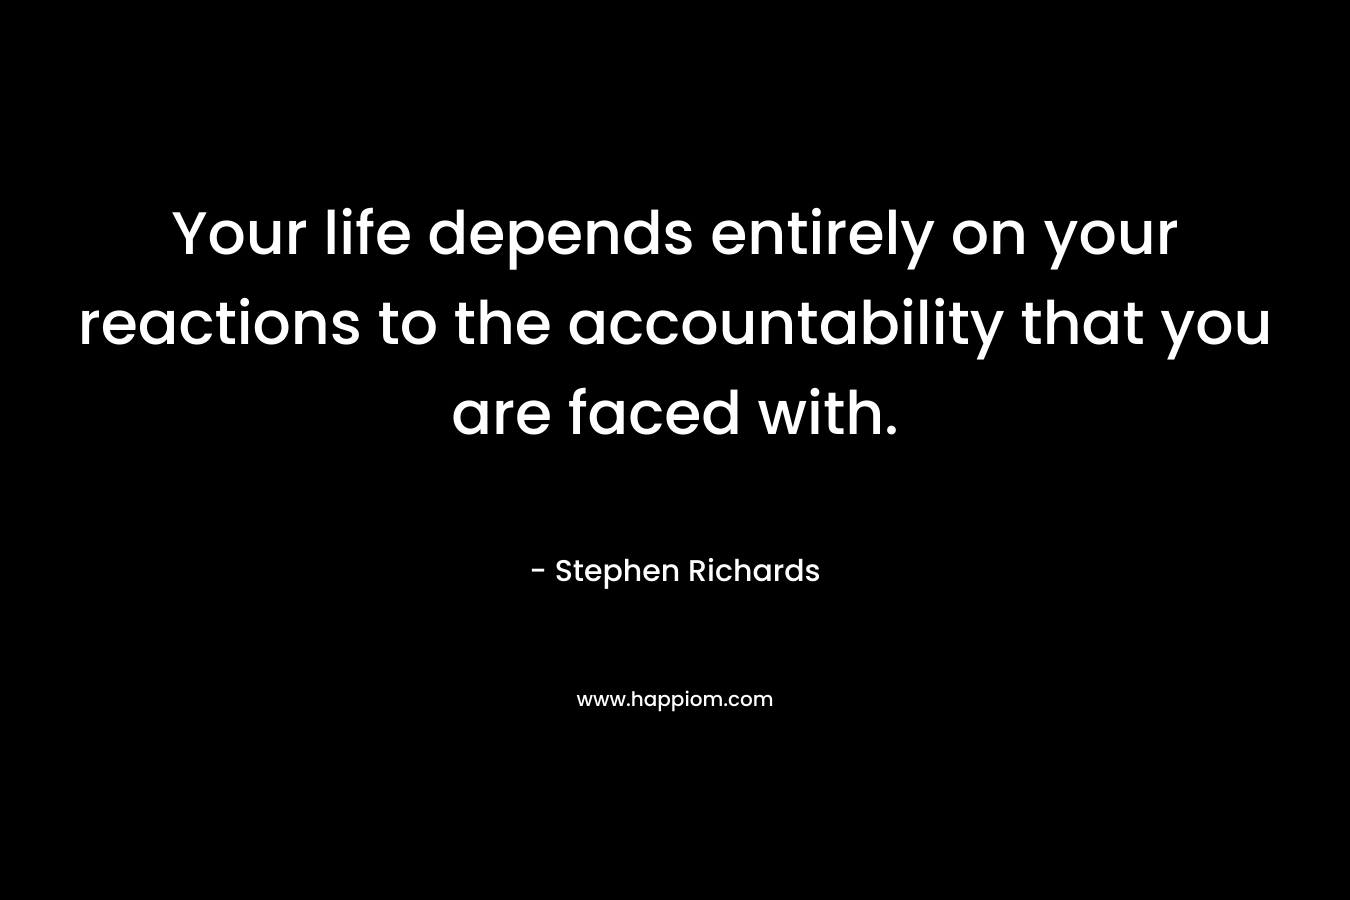 Your life depends entirely on your reactions to the accountability that you are faced with.